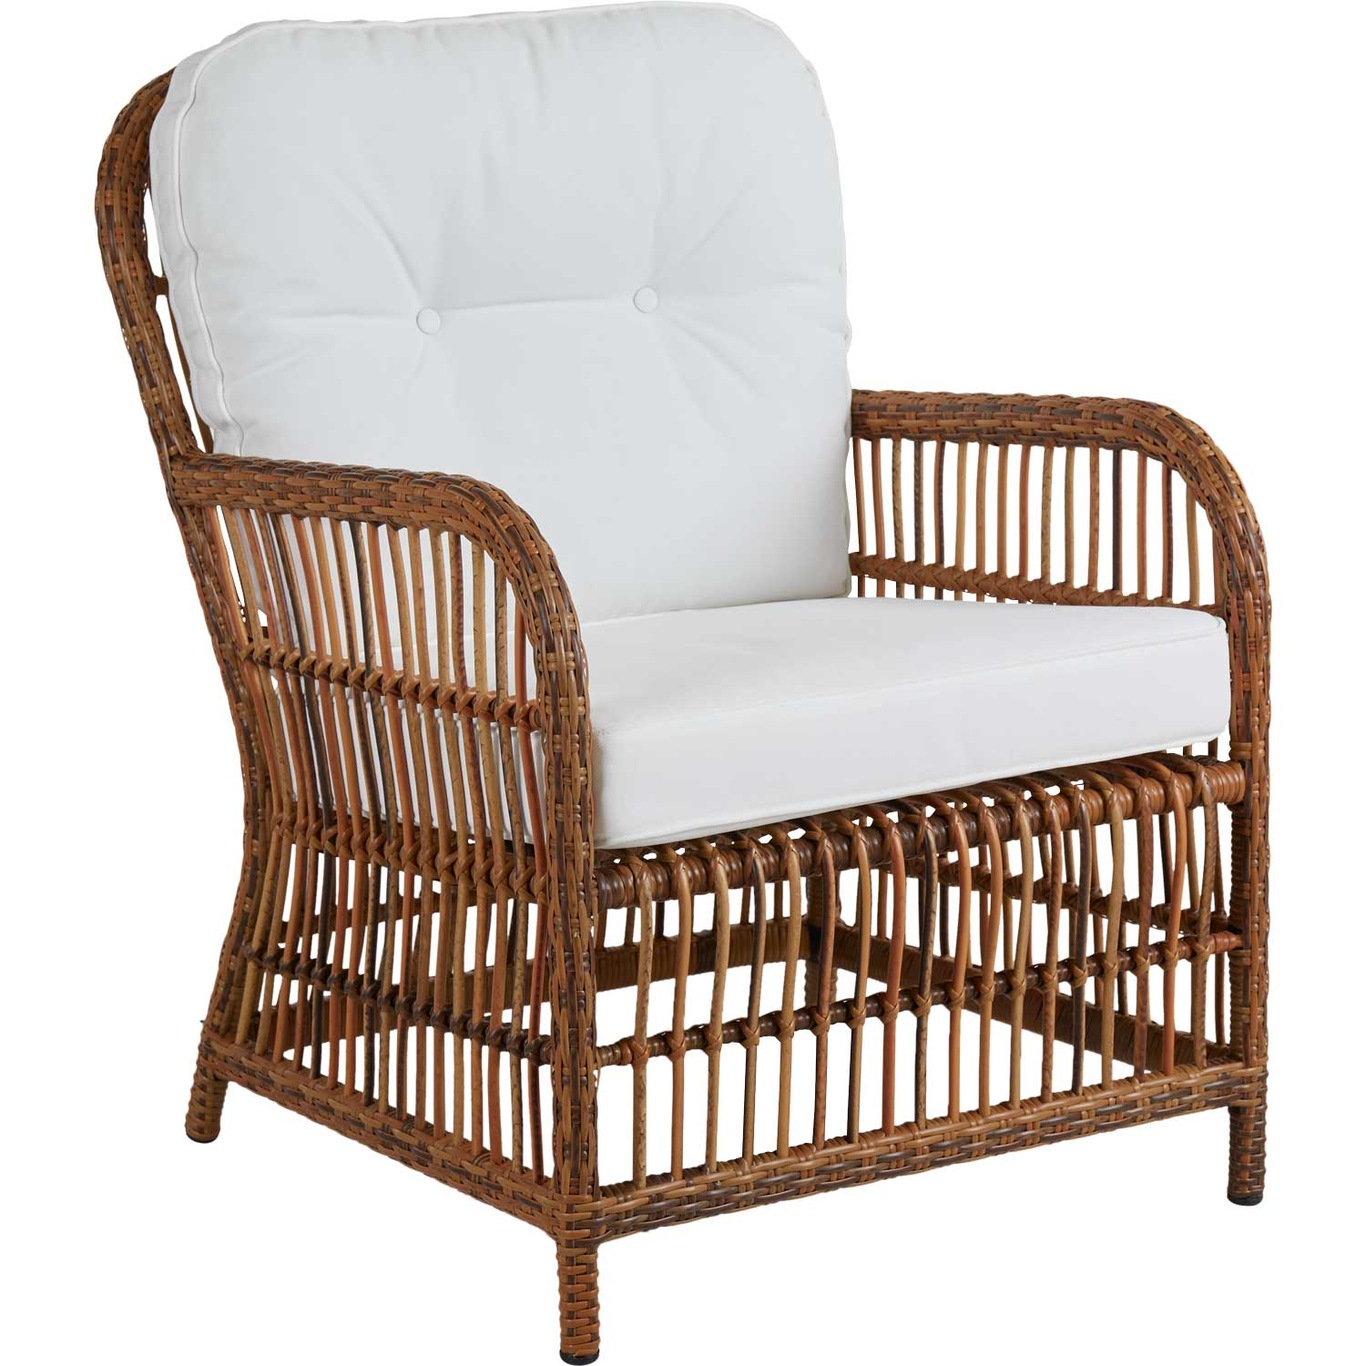 Anemon Lounge Chair, Natural/White